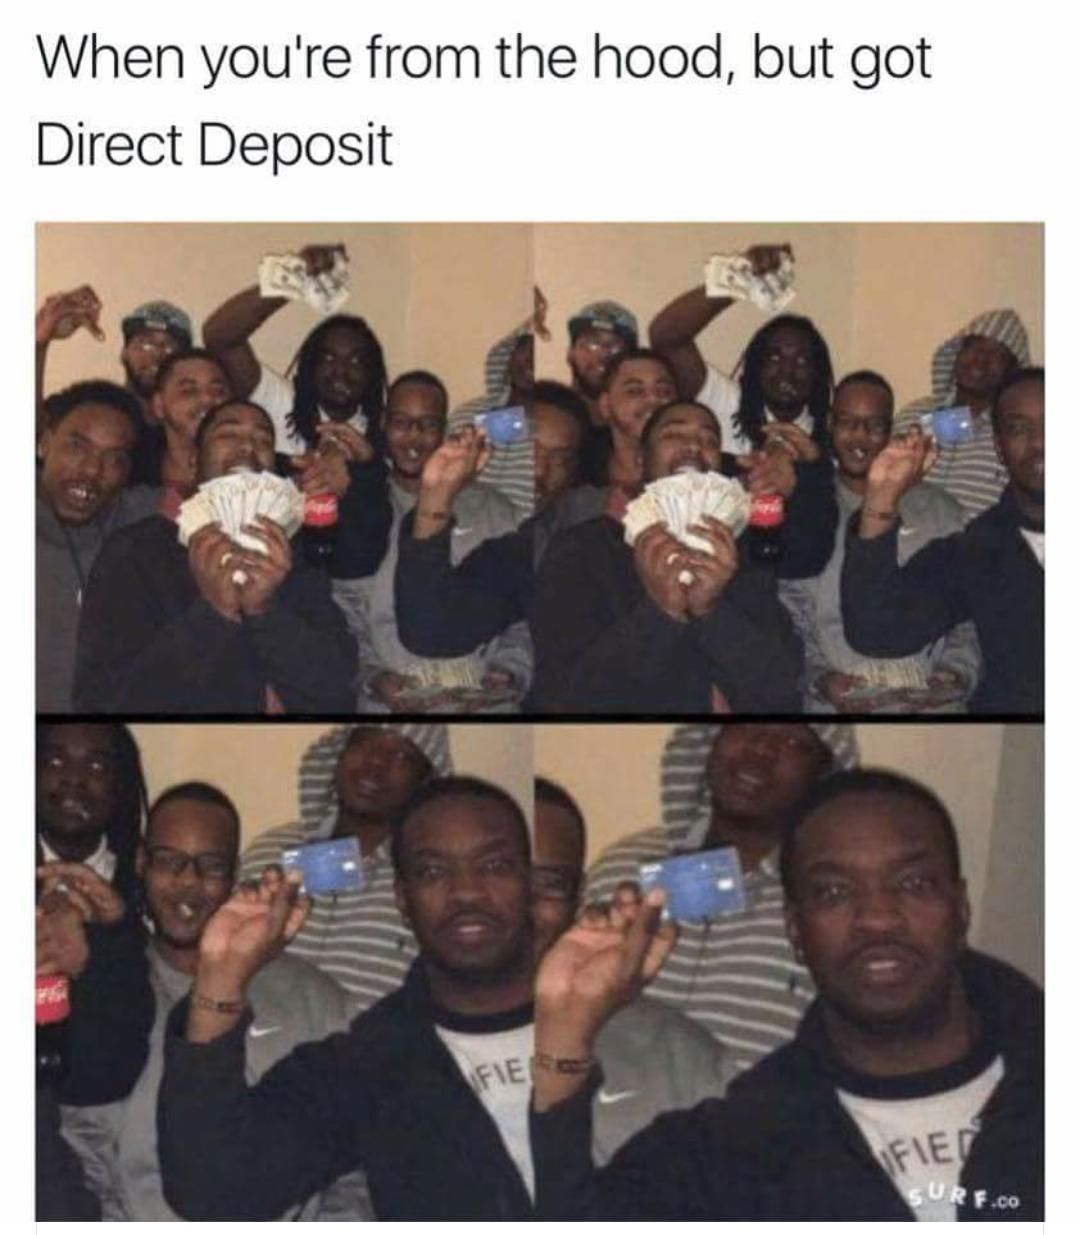 When you're from the hood, but got direct deposit